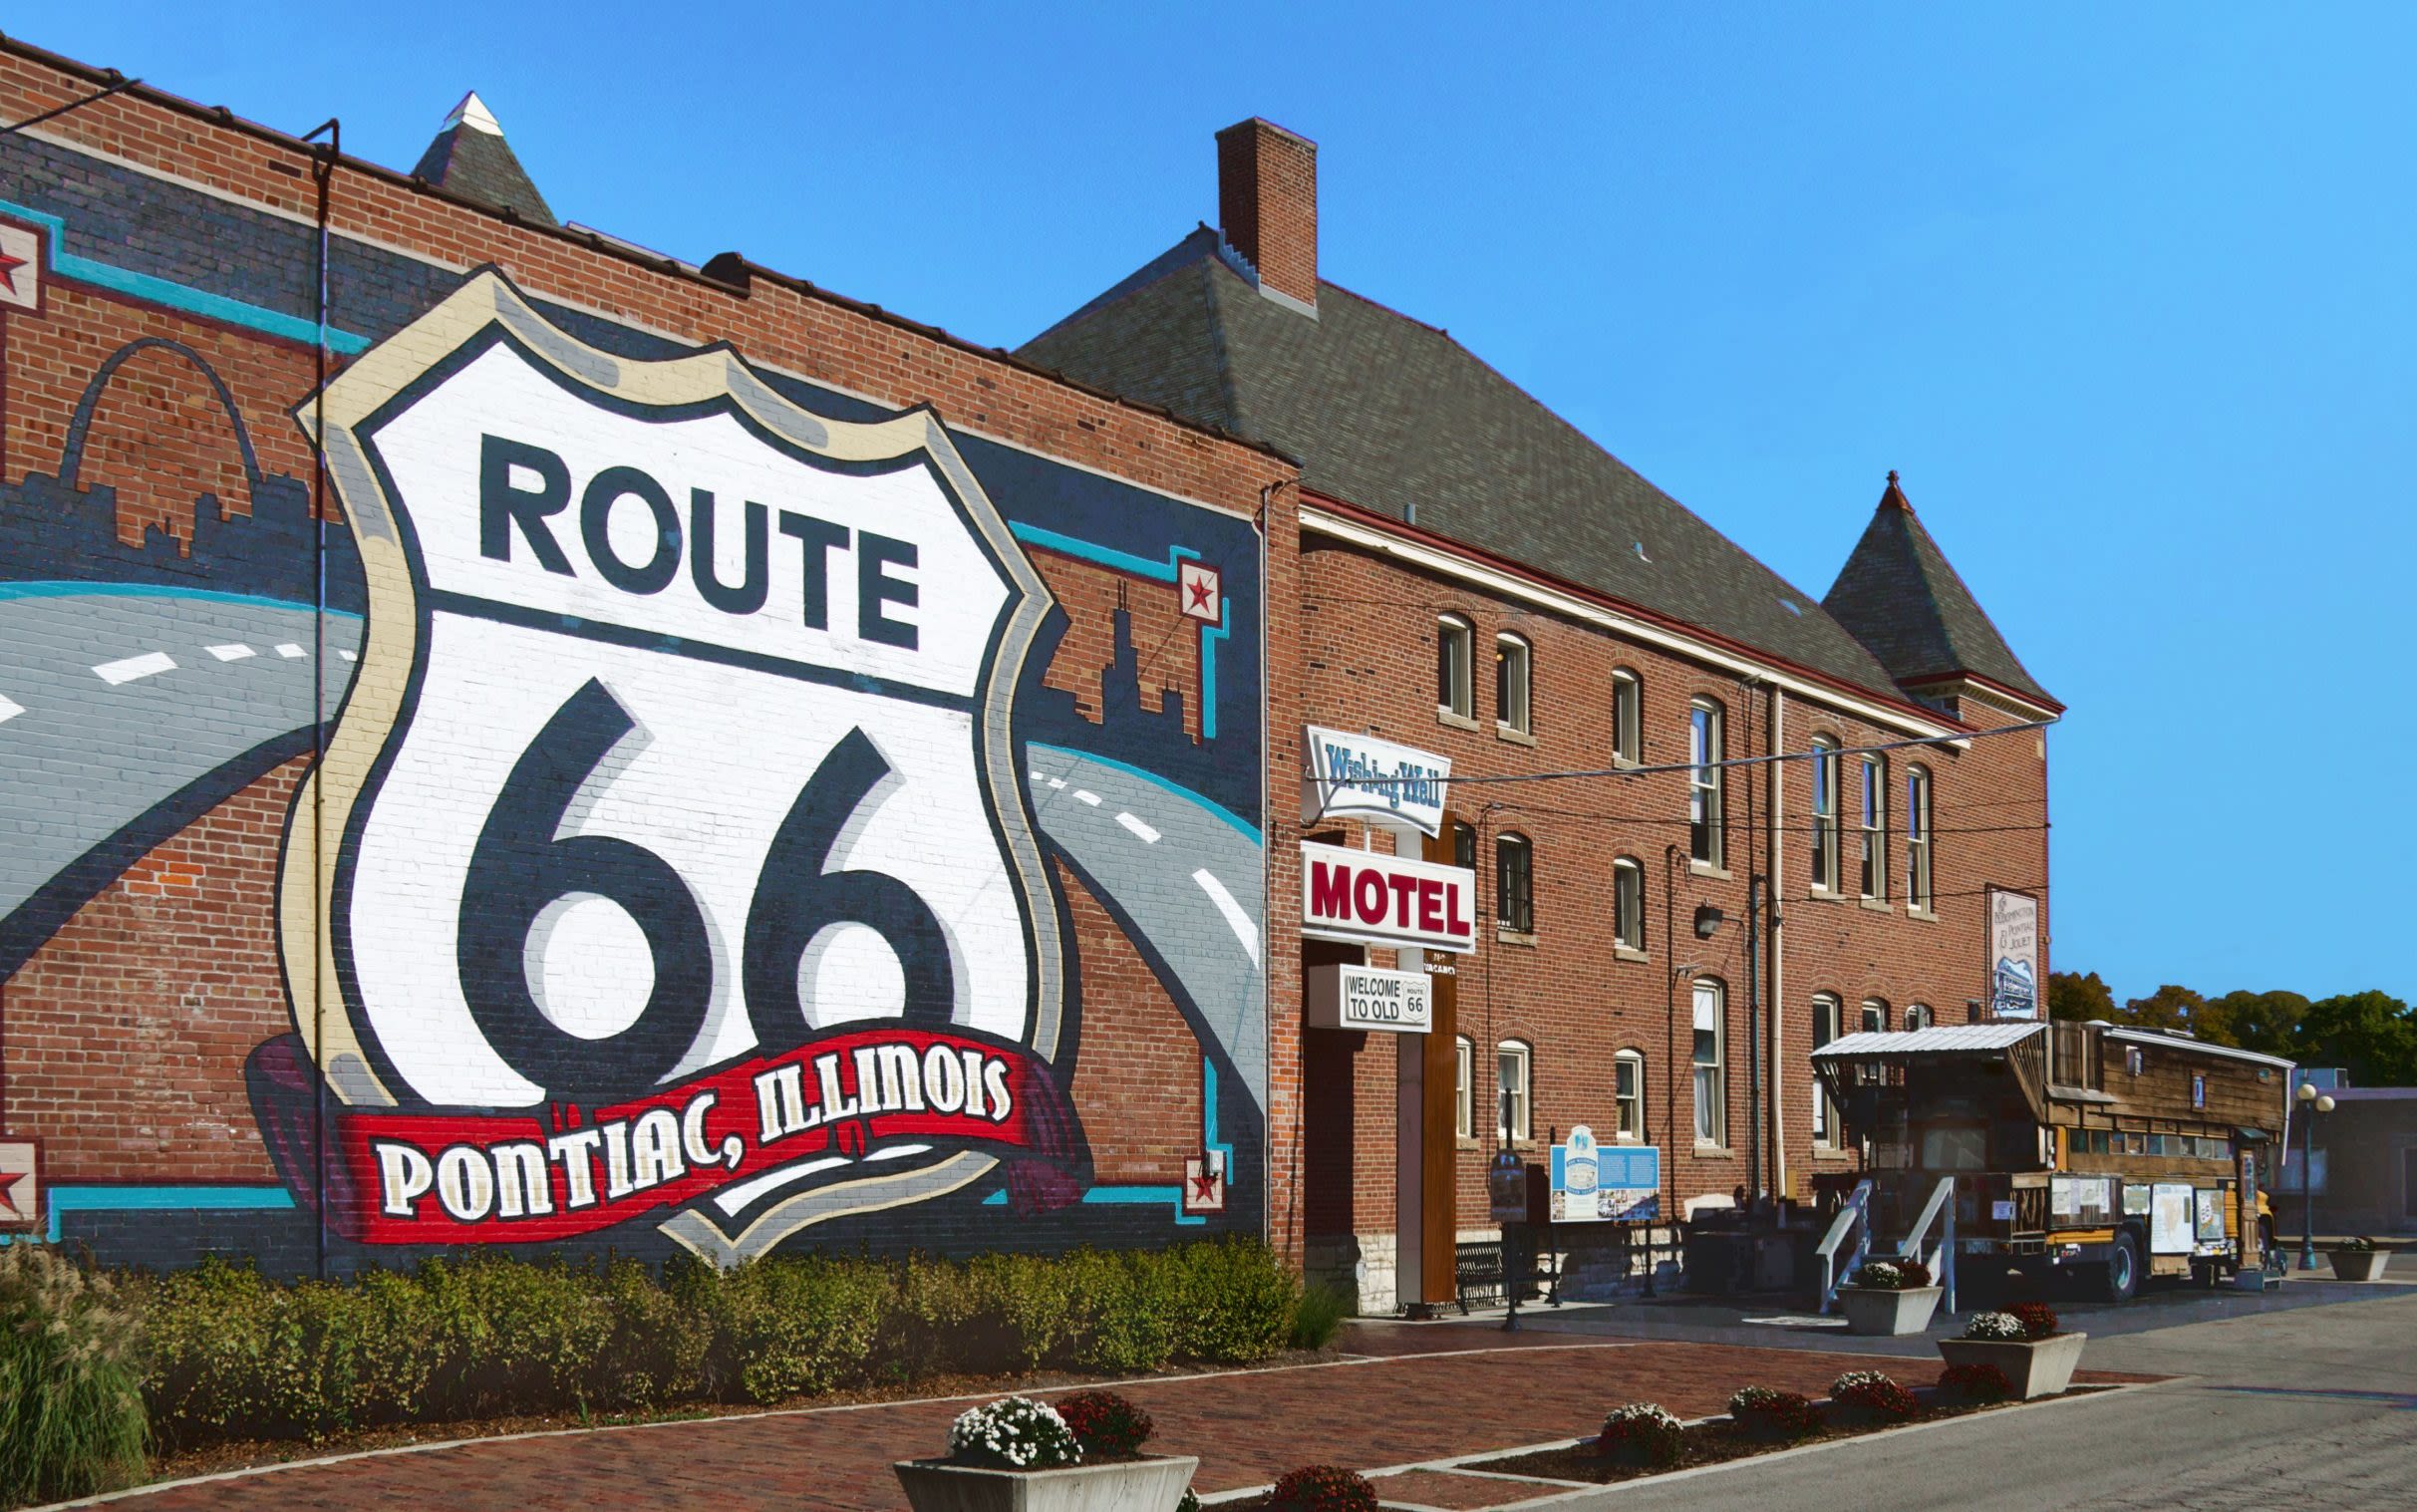 Why Route 66 is still the best way to see – and understand – America